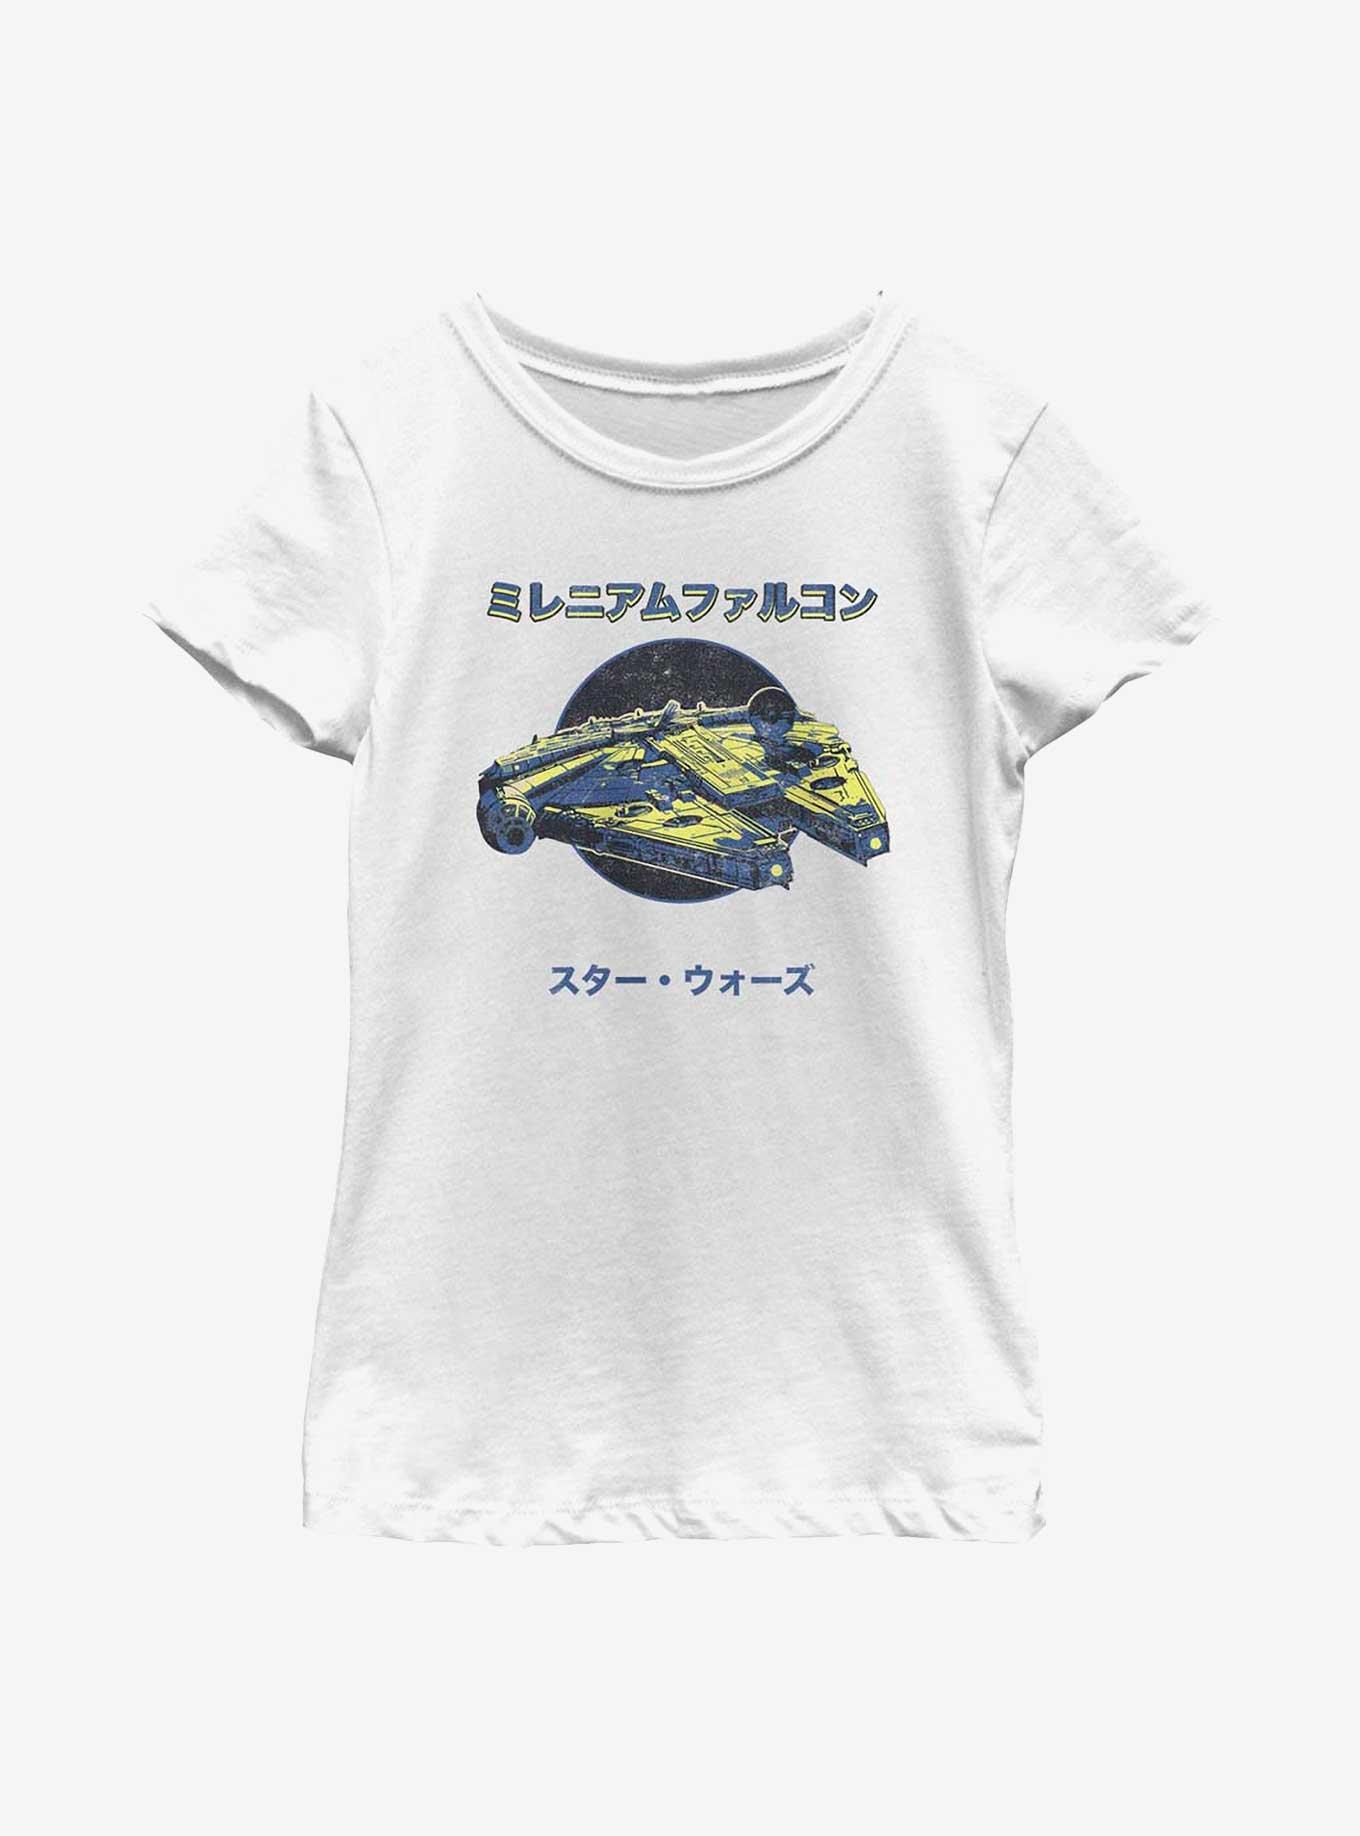 Star Wars Millennium Falcon in Japanese Youth Girls T-Shirt, WHITE, hi-res